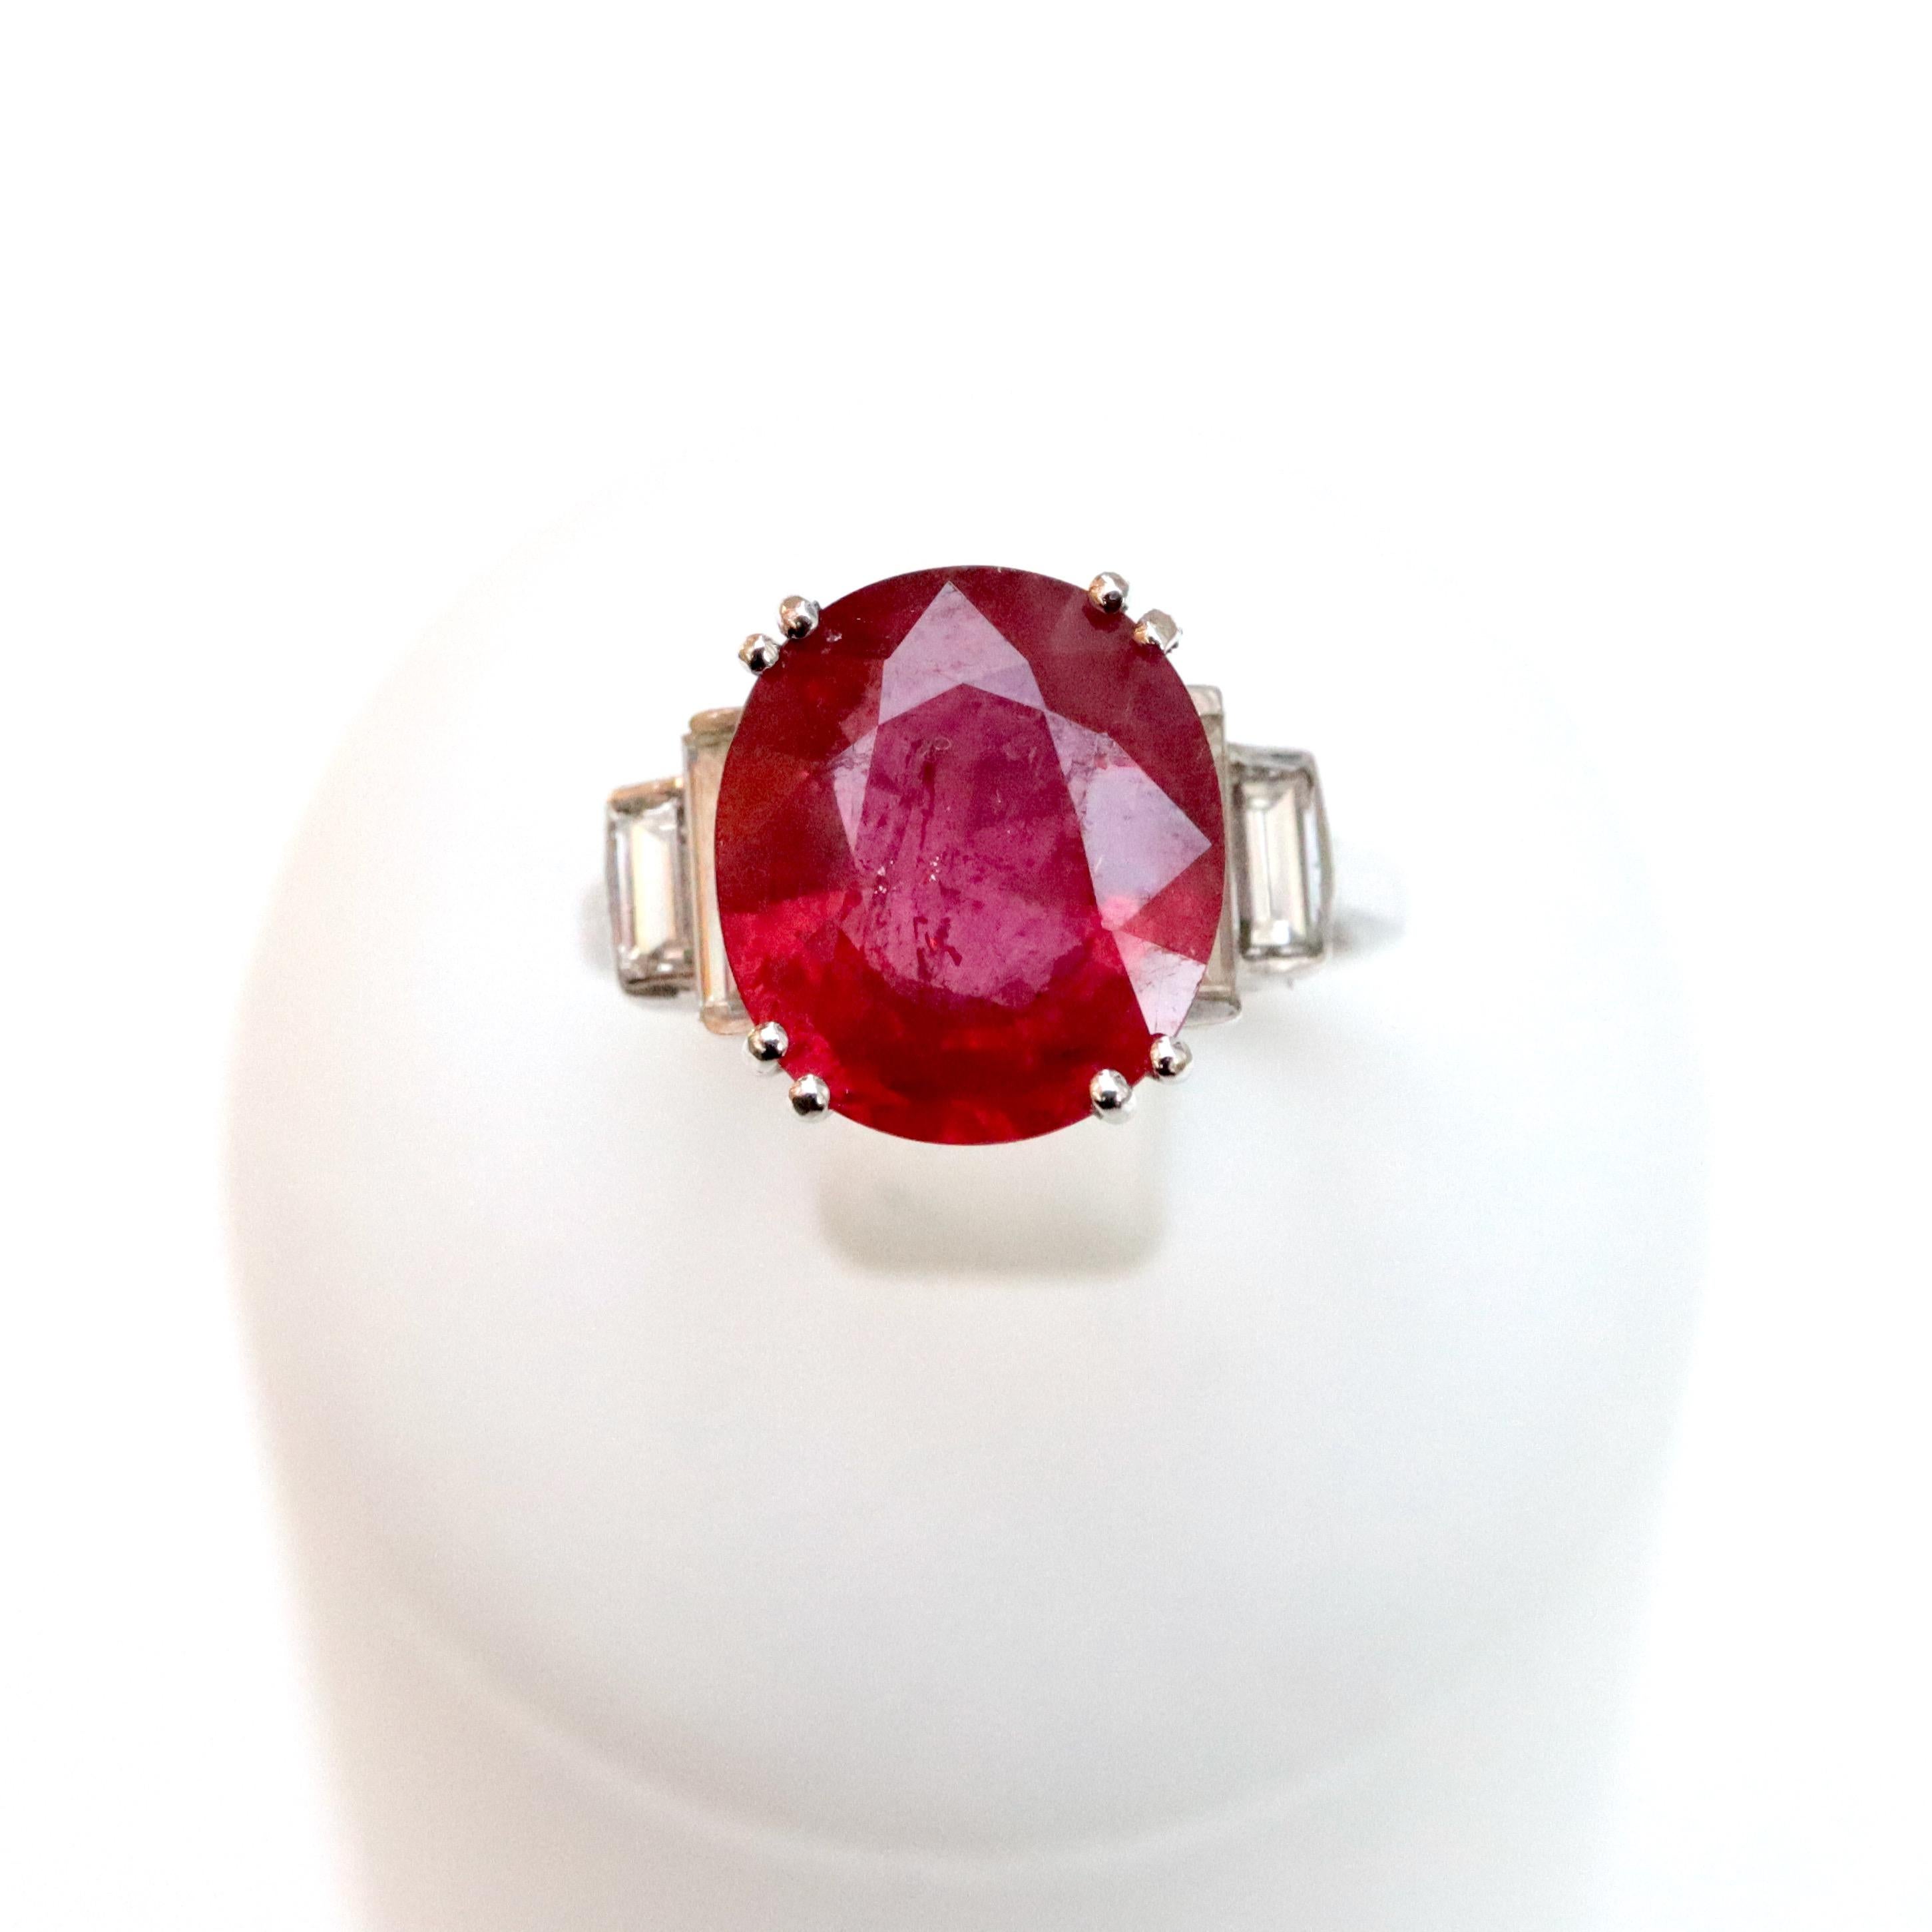 Ring 6.4 carat ruby in 18 carat white gold with diamonds
18-carat white gold ring set in its center with a large claw-set ruby ​​weighing 6.4 carats, flanked on either side by two baguette-cut diamonds for a total weight of 0.66 carat.
Total diamond